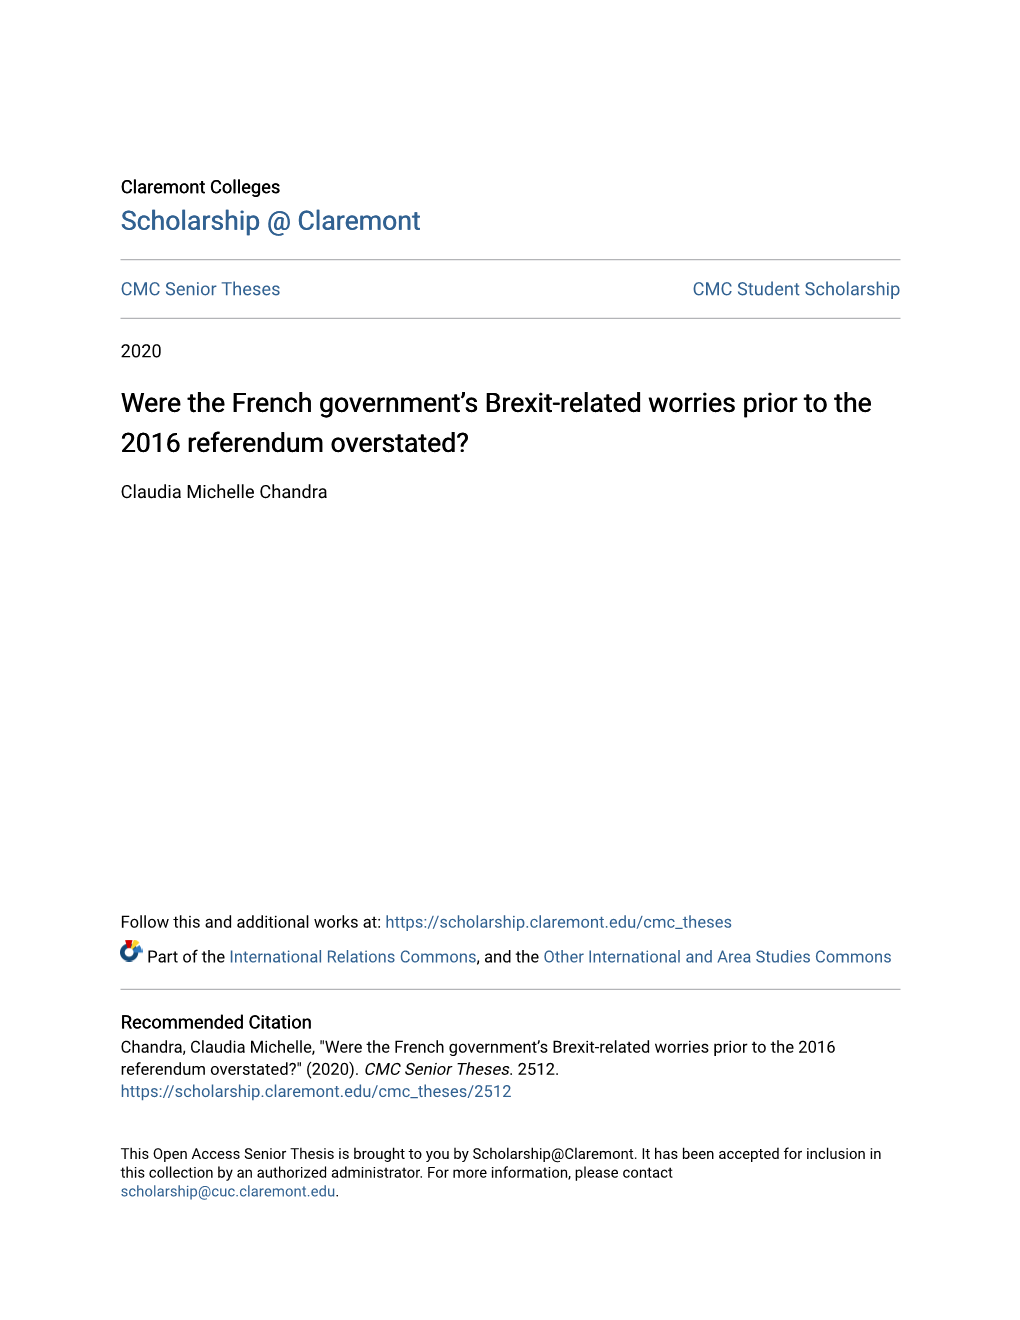 Were the French Government's Brexit-Related Worries Prior to the 2016 Referendum Overstated?